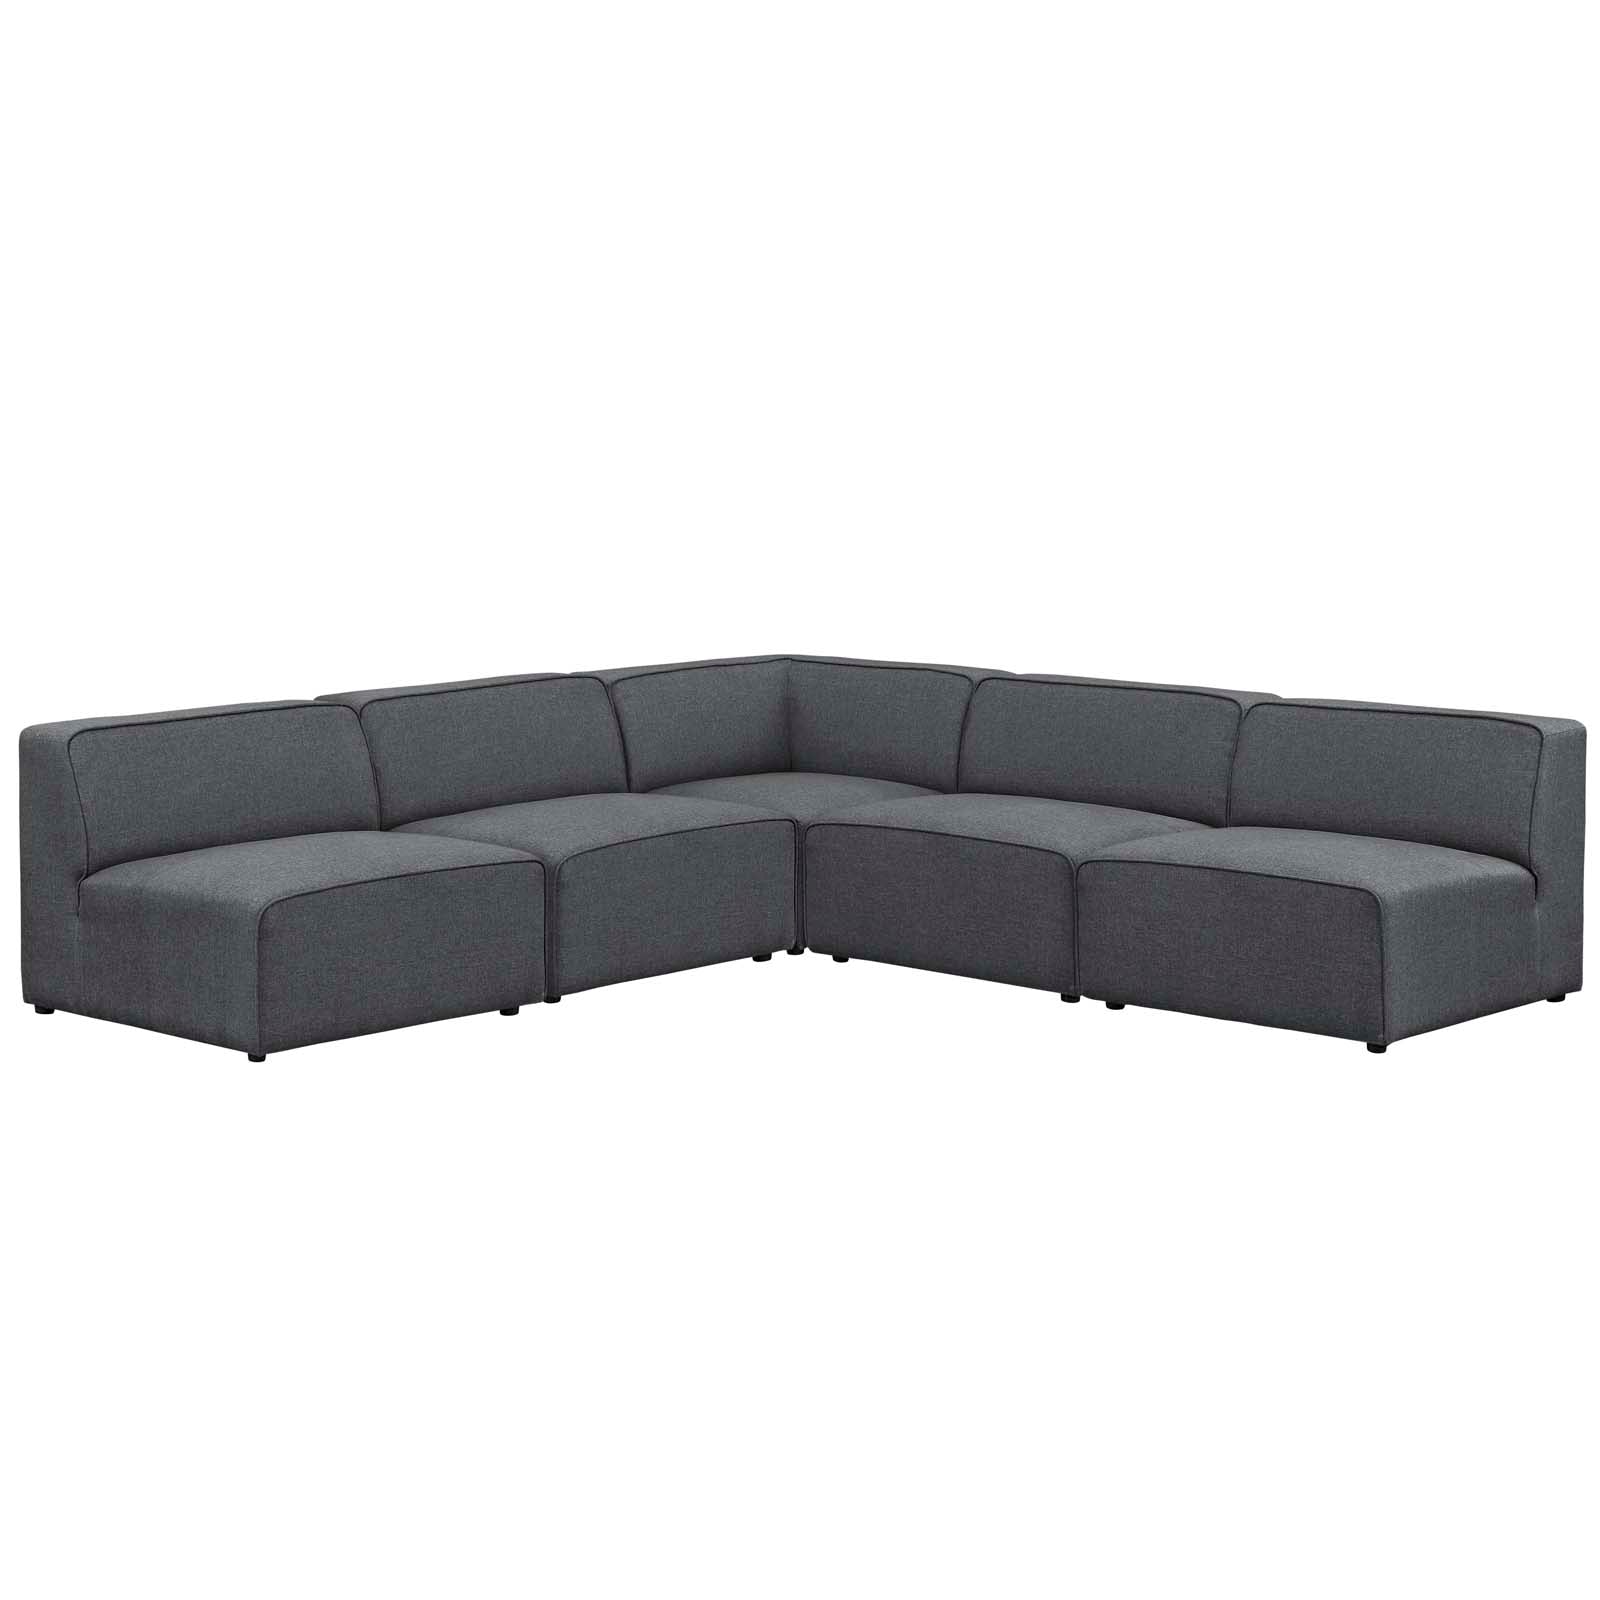 Modway Sectional Sofas - Mingle 5 Piece Upholstered Fabric Armless Sectional Sofa Set Gray